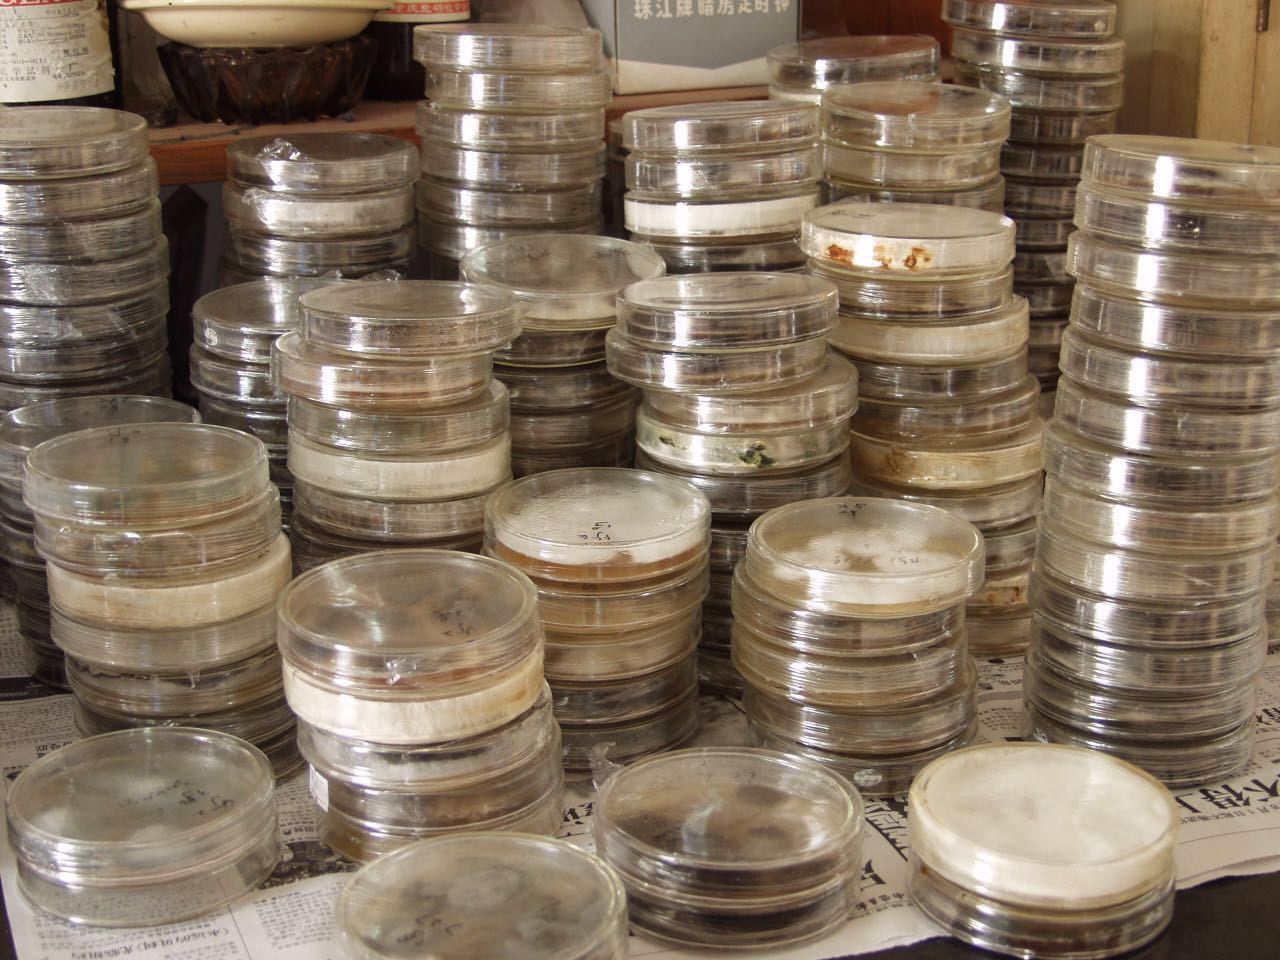 Stacks of dozens of petri dishes with cultures for researching the microbes used to make Sweet Dragon Ball Shu Puer.